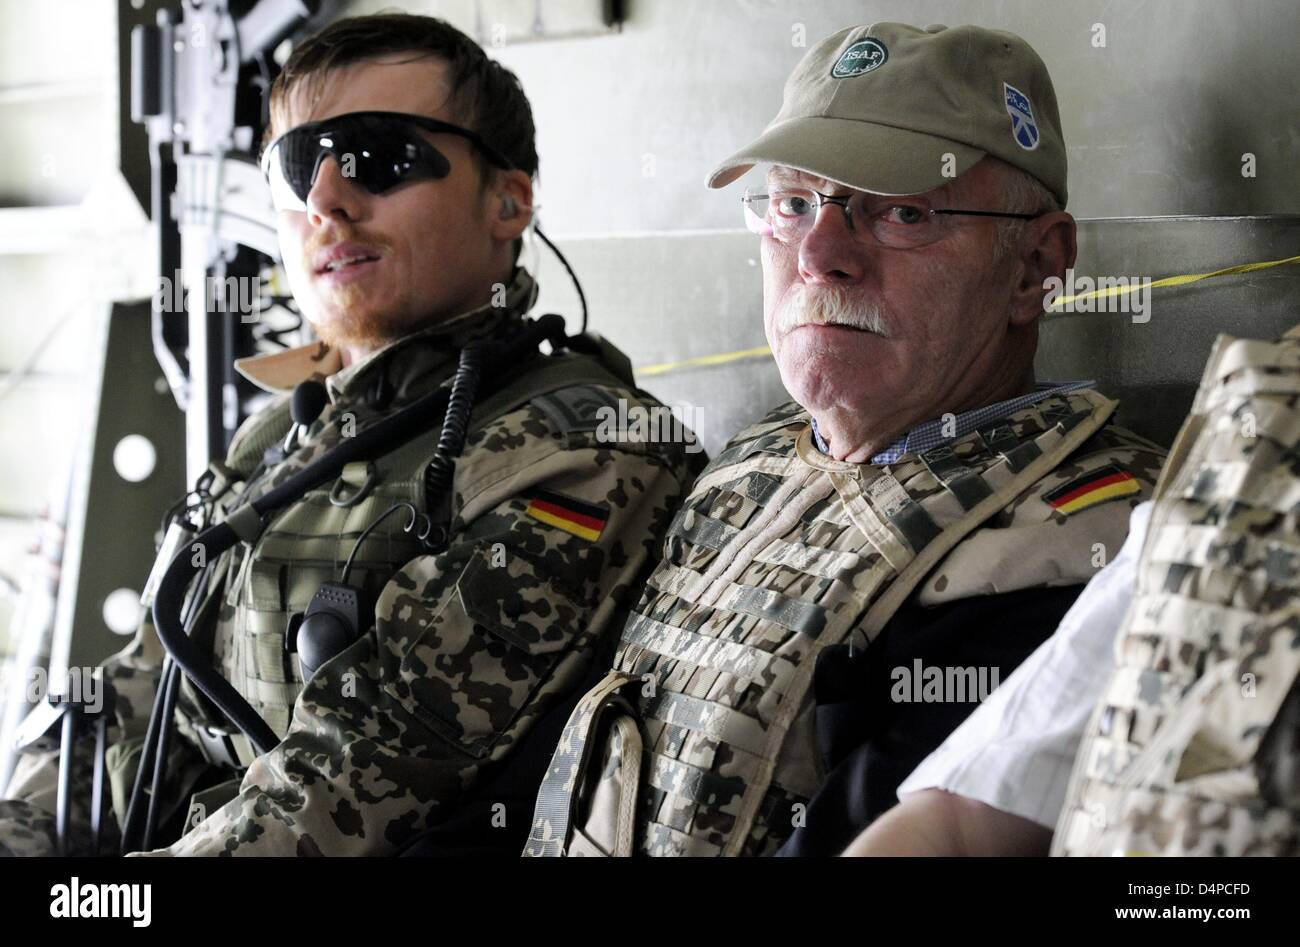 Peter Struck, chairman of the SPD parliamentary group, sits in a CH 53 transport helicopter of the German Bundeswehr during a flight from Masar-i-Scharif to the camp Mike Spann in Afghanistan, 04 June 2009. There, Struck will visit Bundeswehr soldiers on duty in Afghanistan. Photo: MAURIZIO GAMBARINI Stock Photo